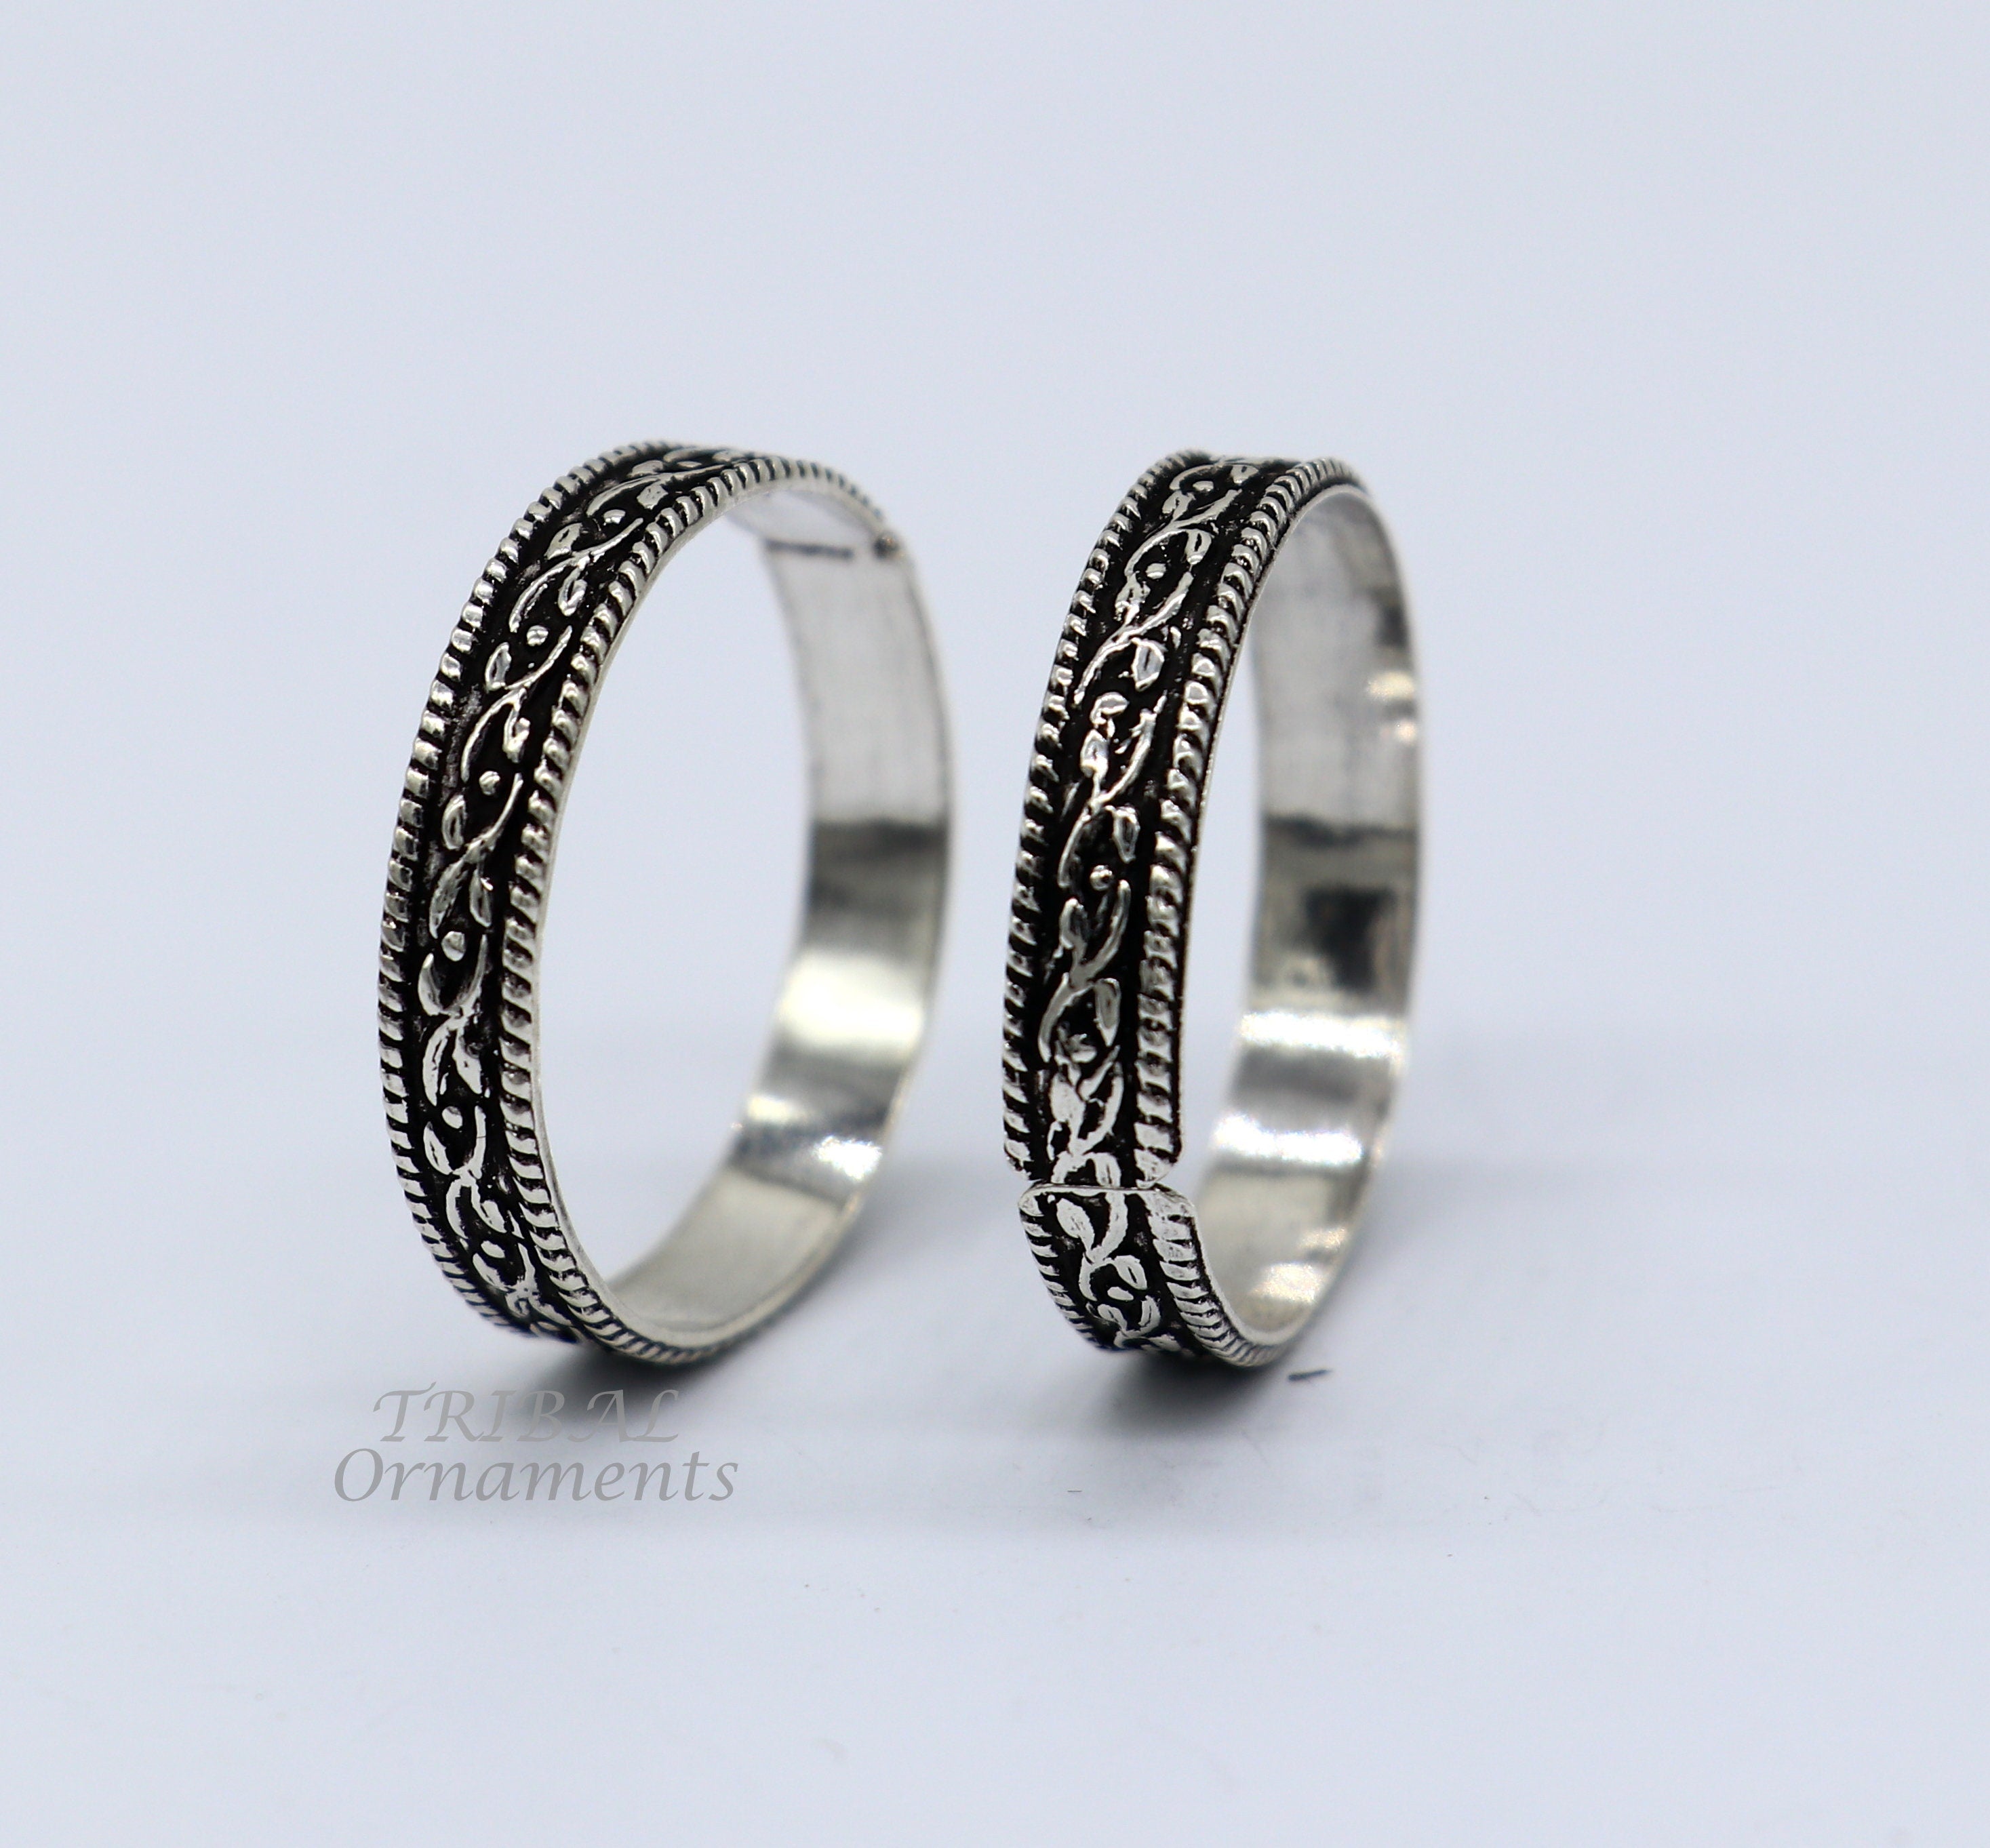 925 sterling silver modern trendy traditional cultural design thumb ring  for foot, thumb toe ring band fro brides ntr64 | TRIBAL ORNAMENTS